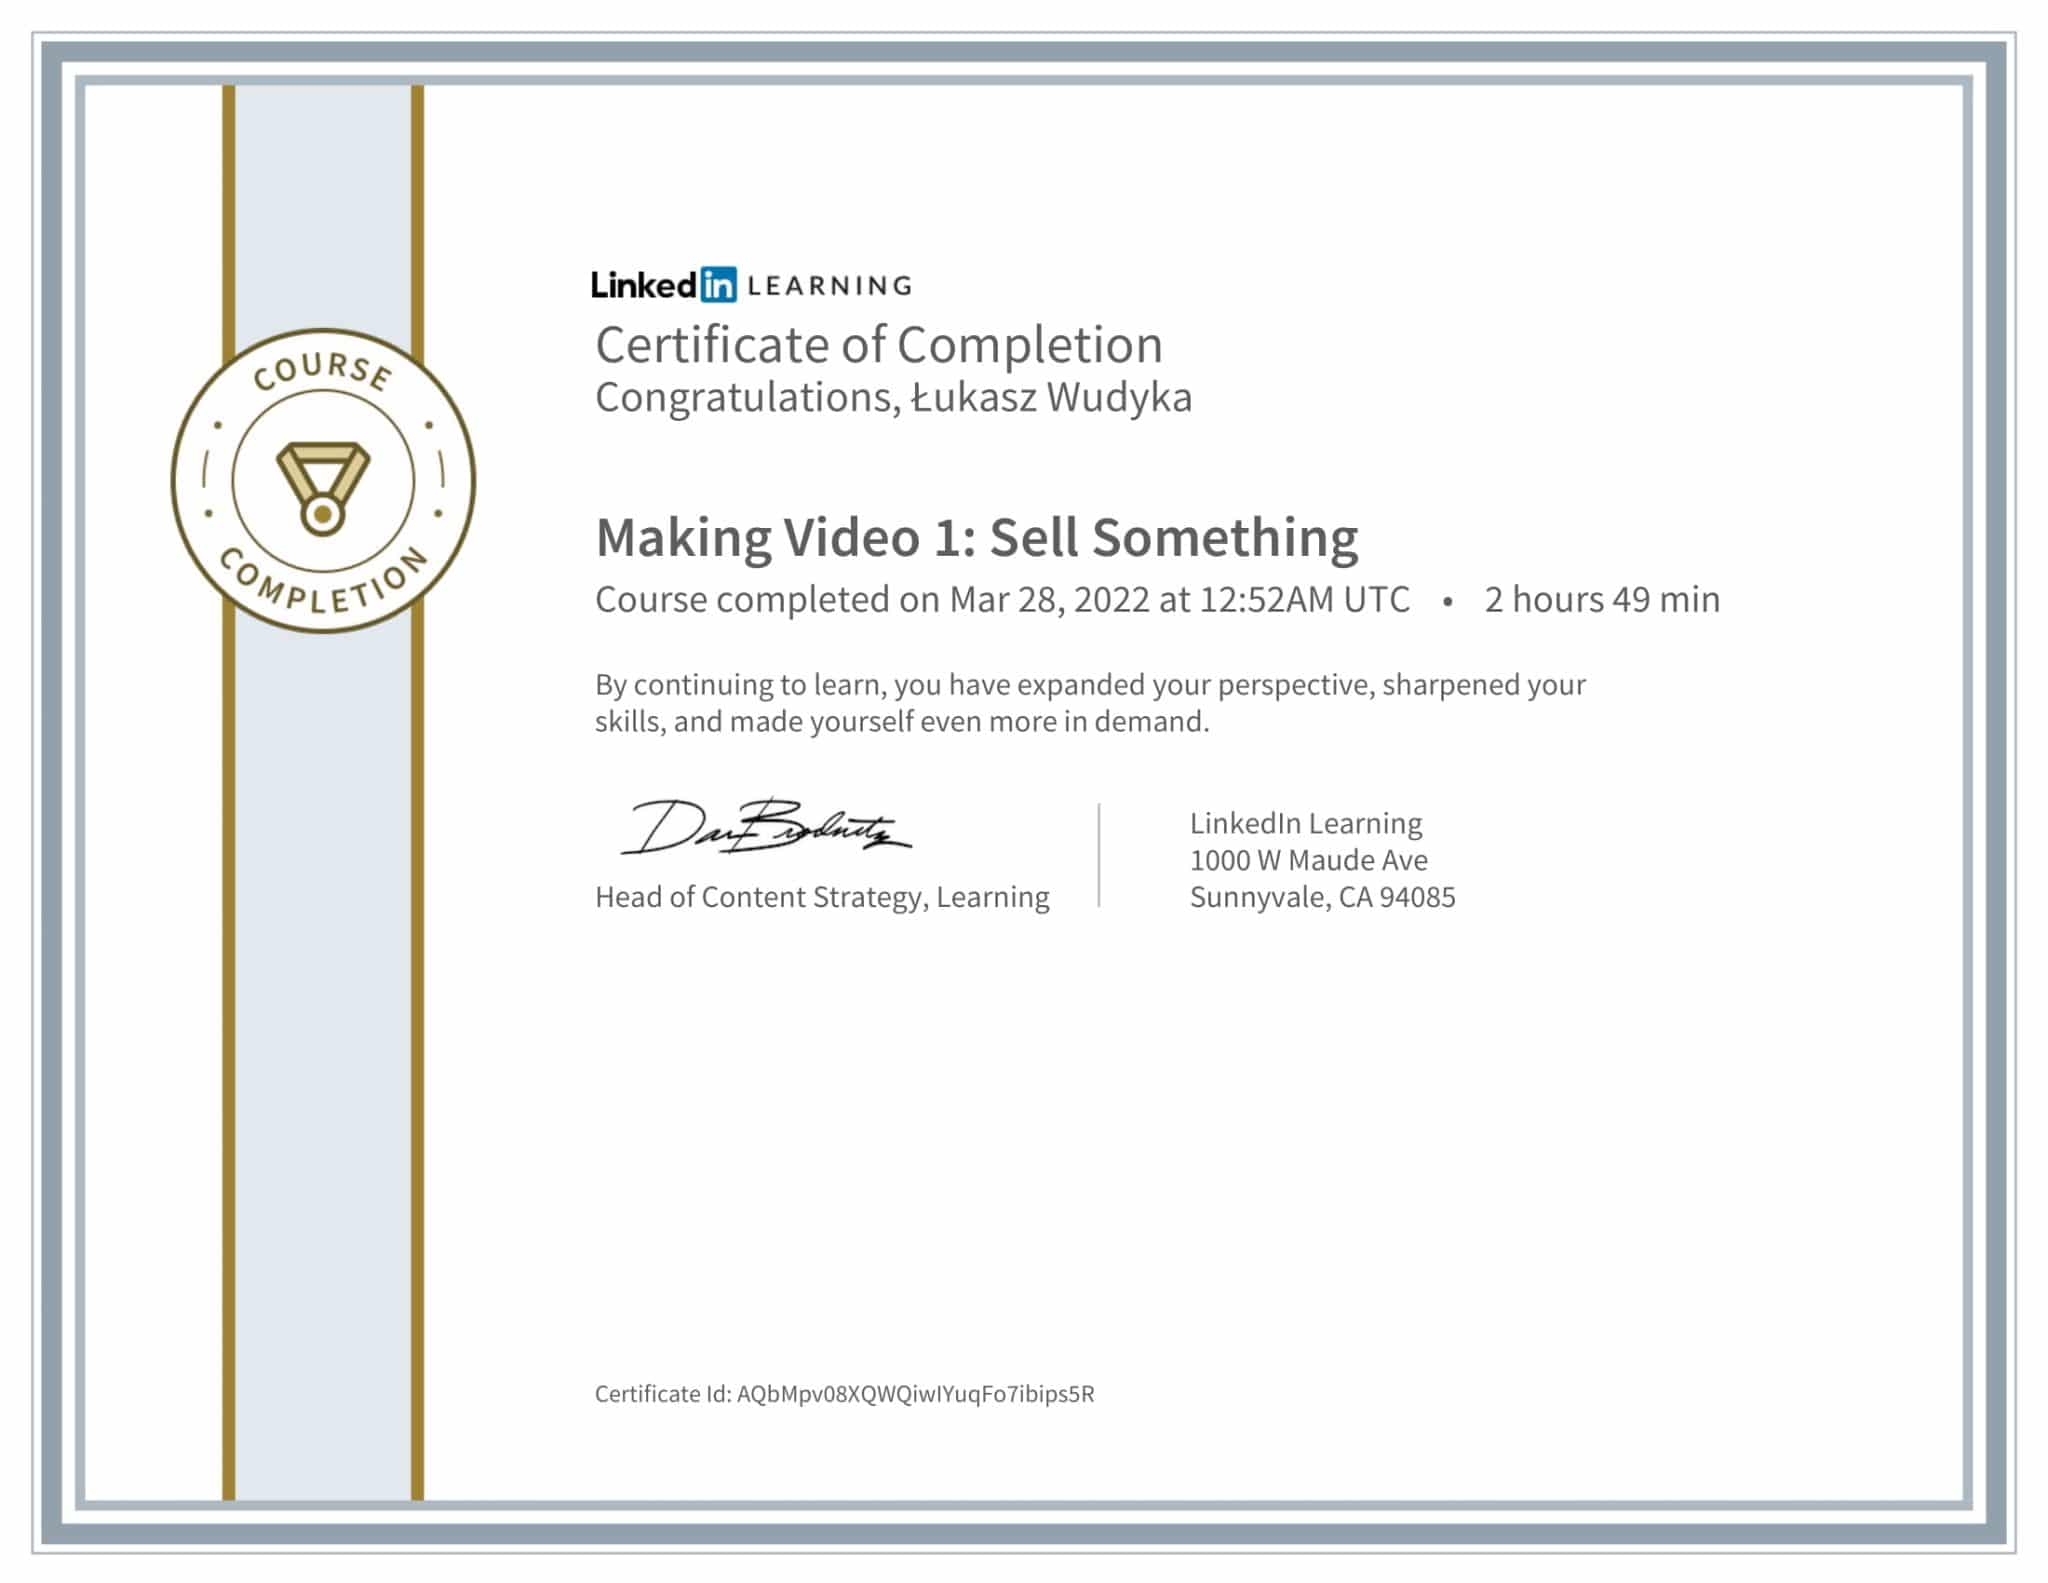 CertificateOfCompletion_Making Video 1 Sell Something-1